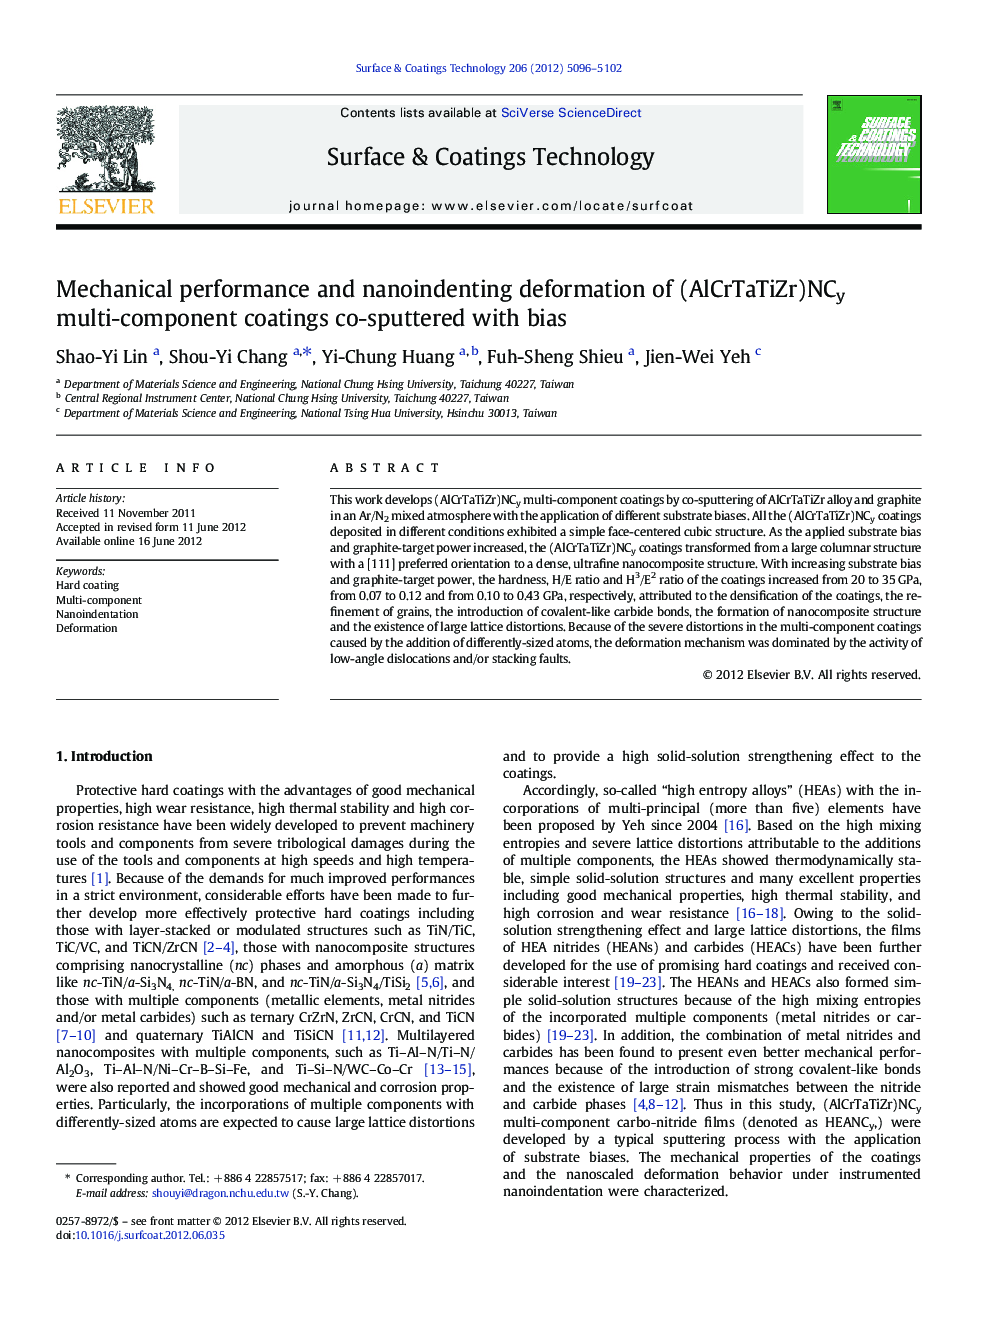 Mechanical performance and nanoindenting deformation of (AlCrTaTiZr)NCy multi-component coatings co-sputtered with bias